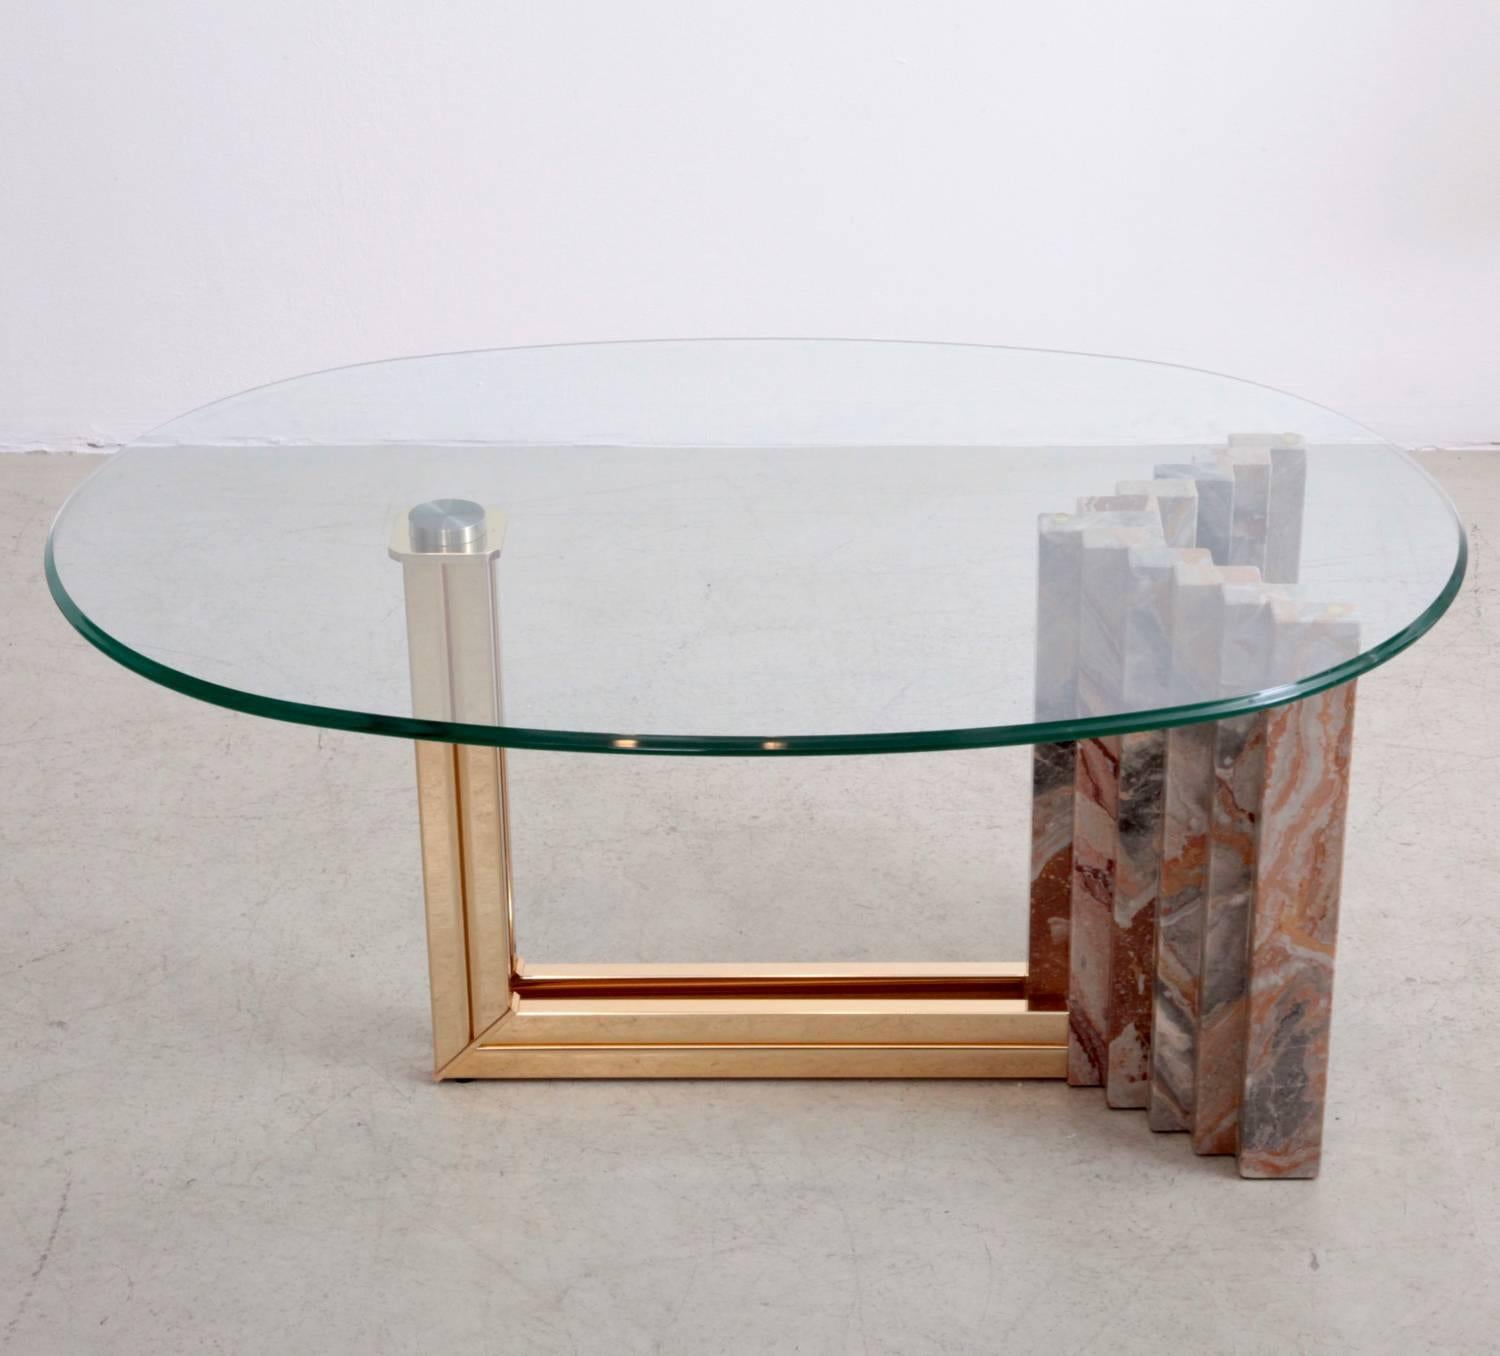 Mint high end manufactured 1970s marble and brass coffee table with very elegant glass top.

